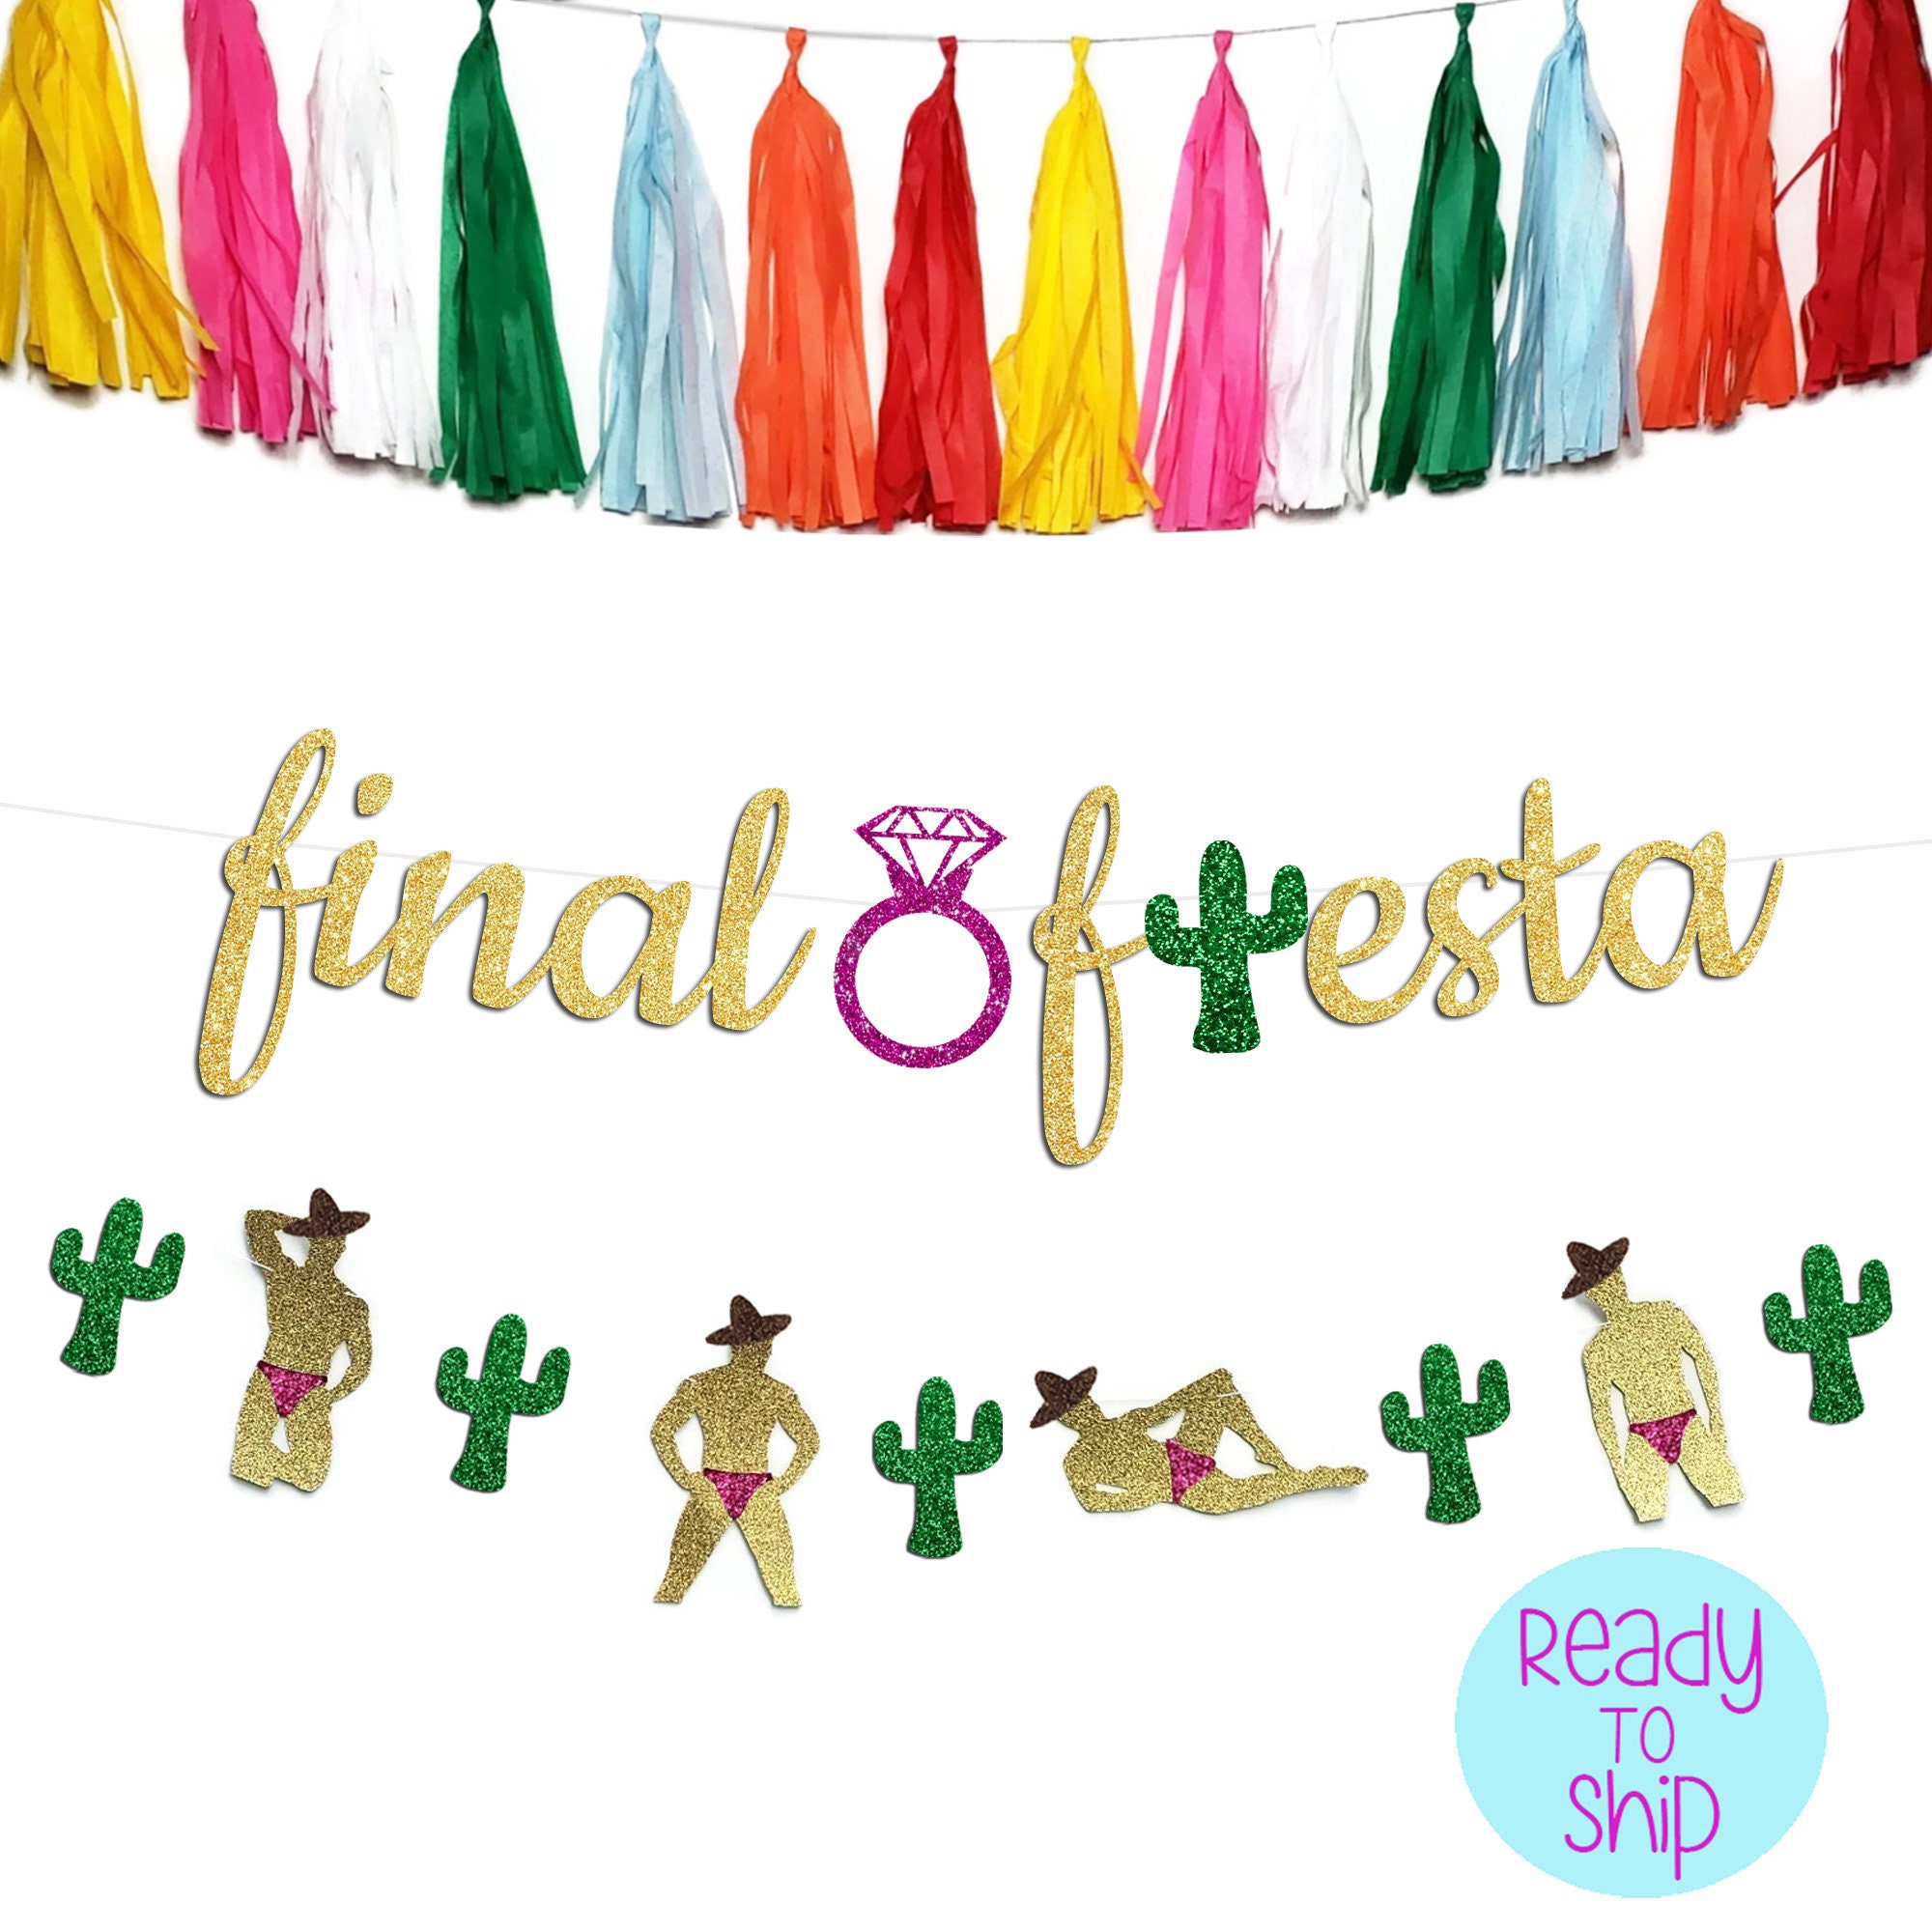 Final Fiesta Bachelorette Party Decorations- Cinco De Mayo Party  Supplies-Fiesta Banner Cactus Pattern Garland Flag For Baby Shower Bridal  Wedding Engagement Mexican Party Decoration Banner – BOSTON CREATIVE COMPANY